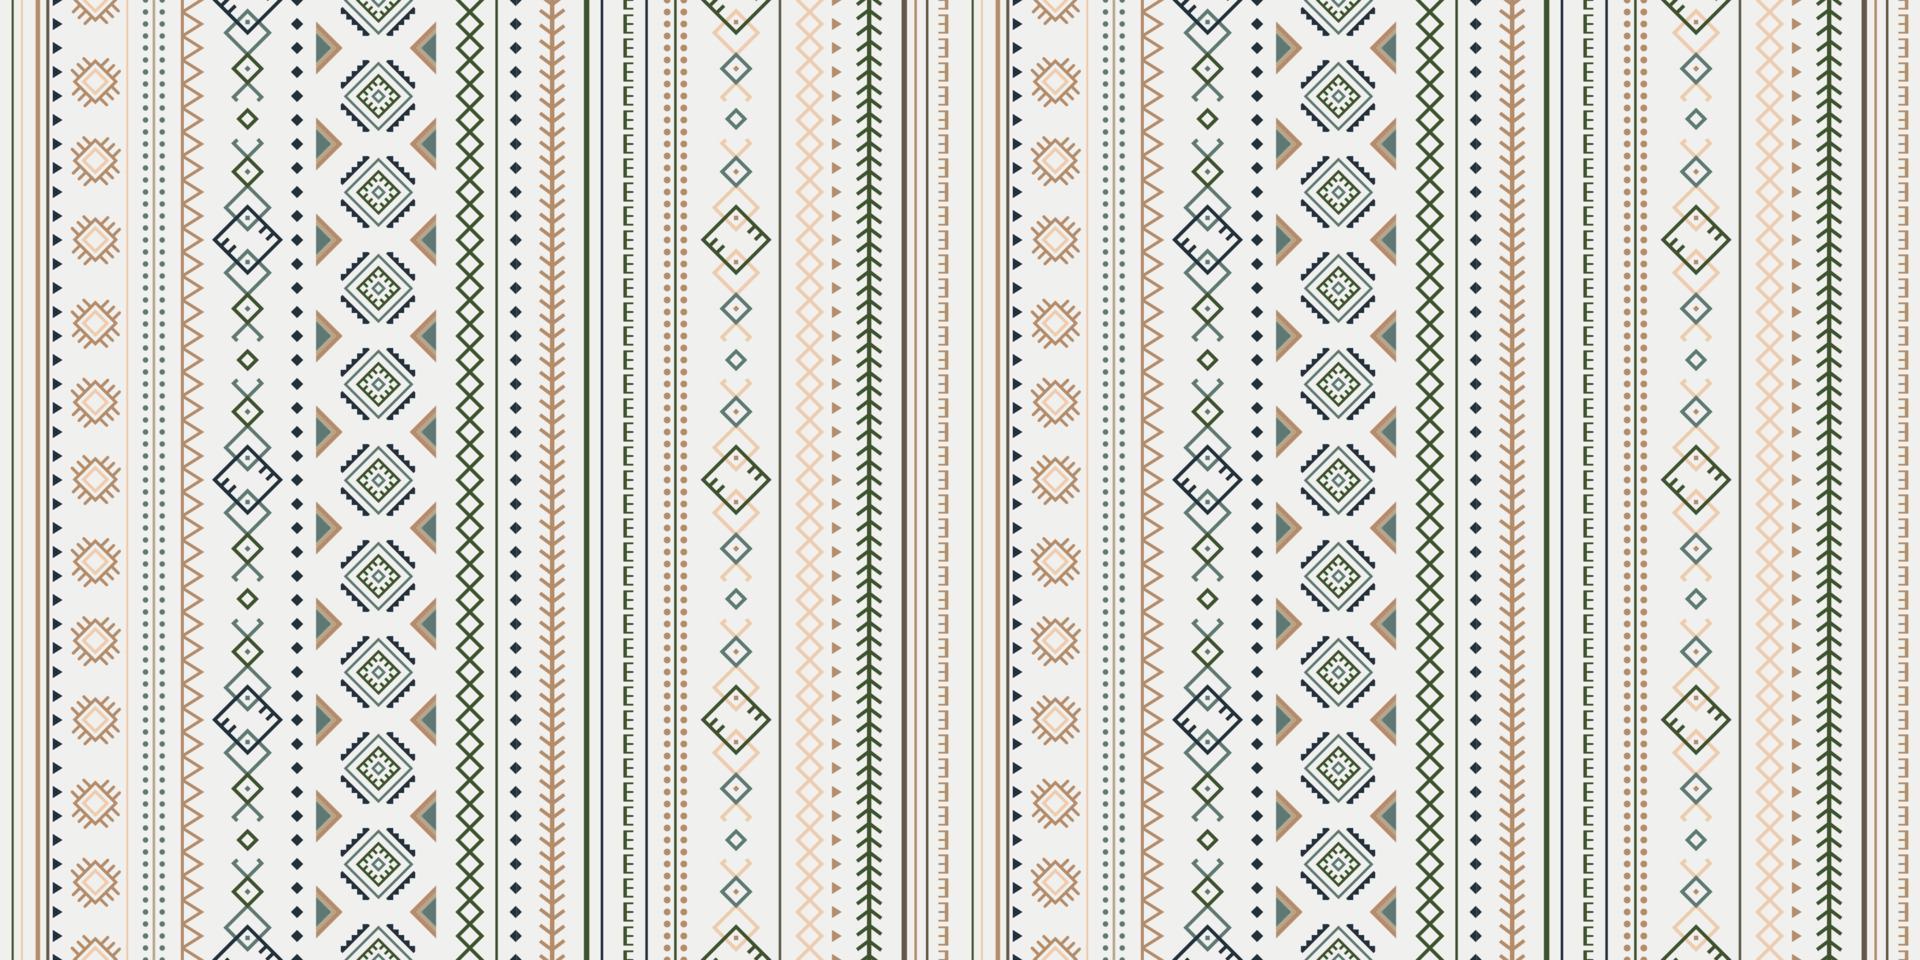 Seamless Vector Geometric Pattern. Tribal Vintage Ethnic Drawing. Wallpaper, Fabric Design, Fabric, Paper, Packaging, Postcards.